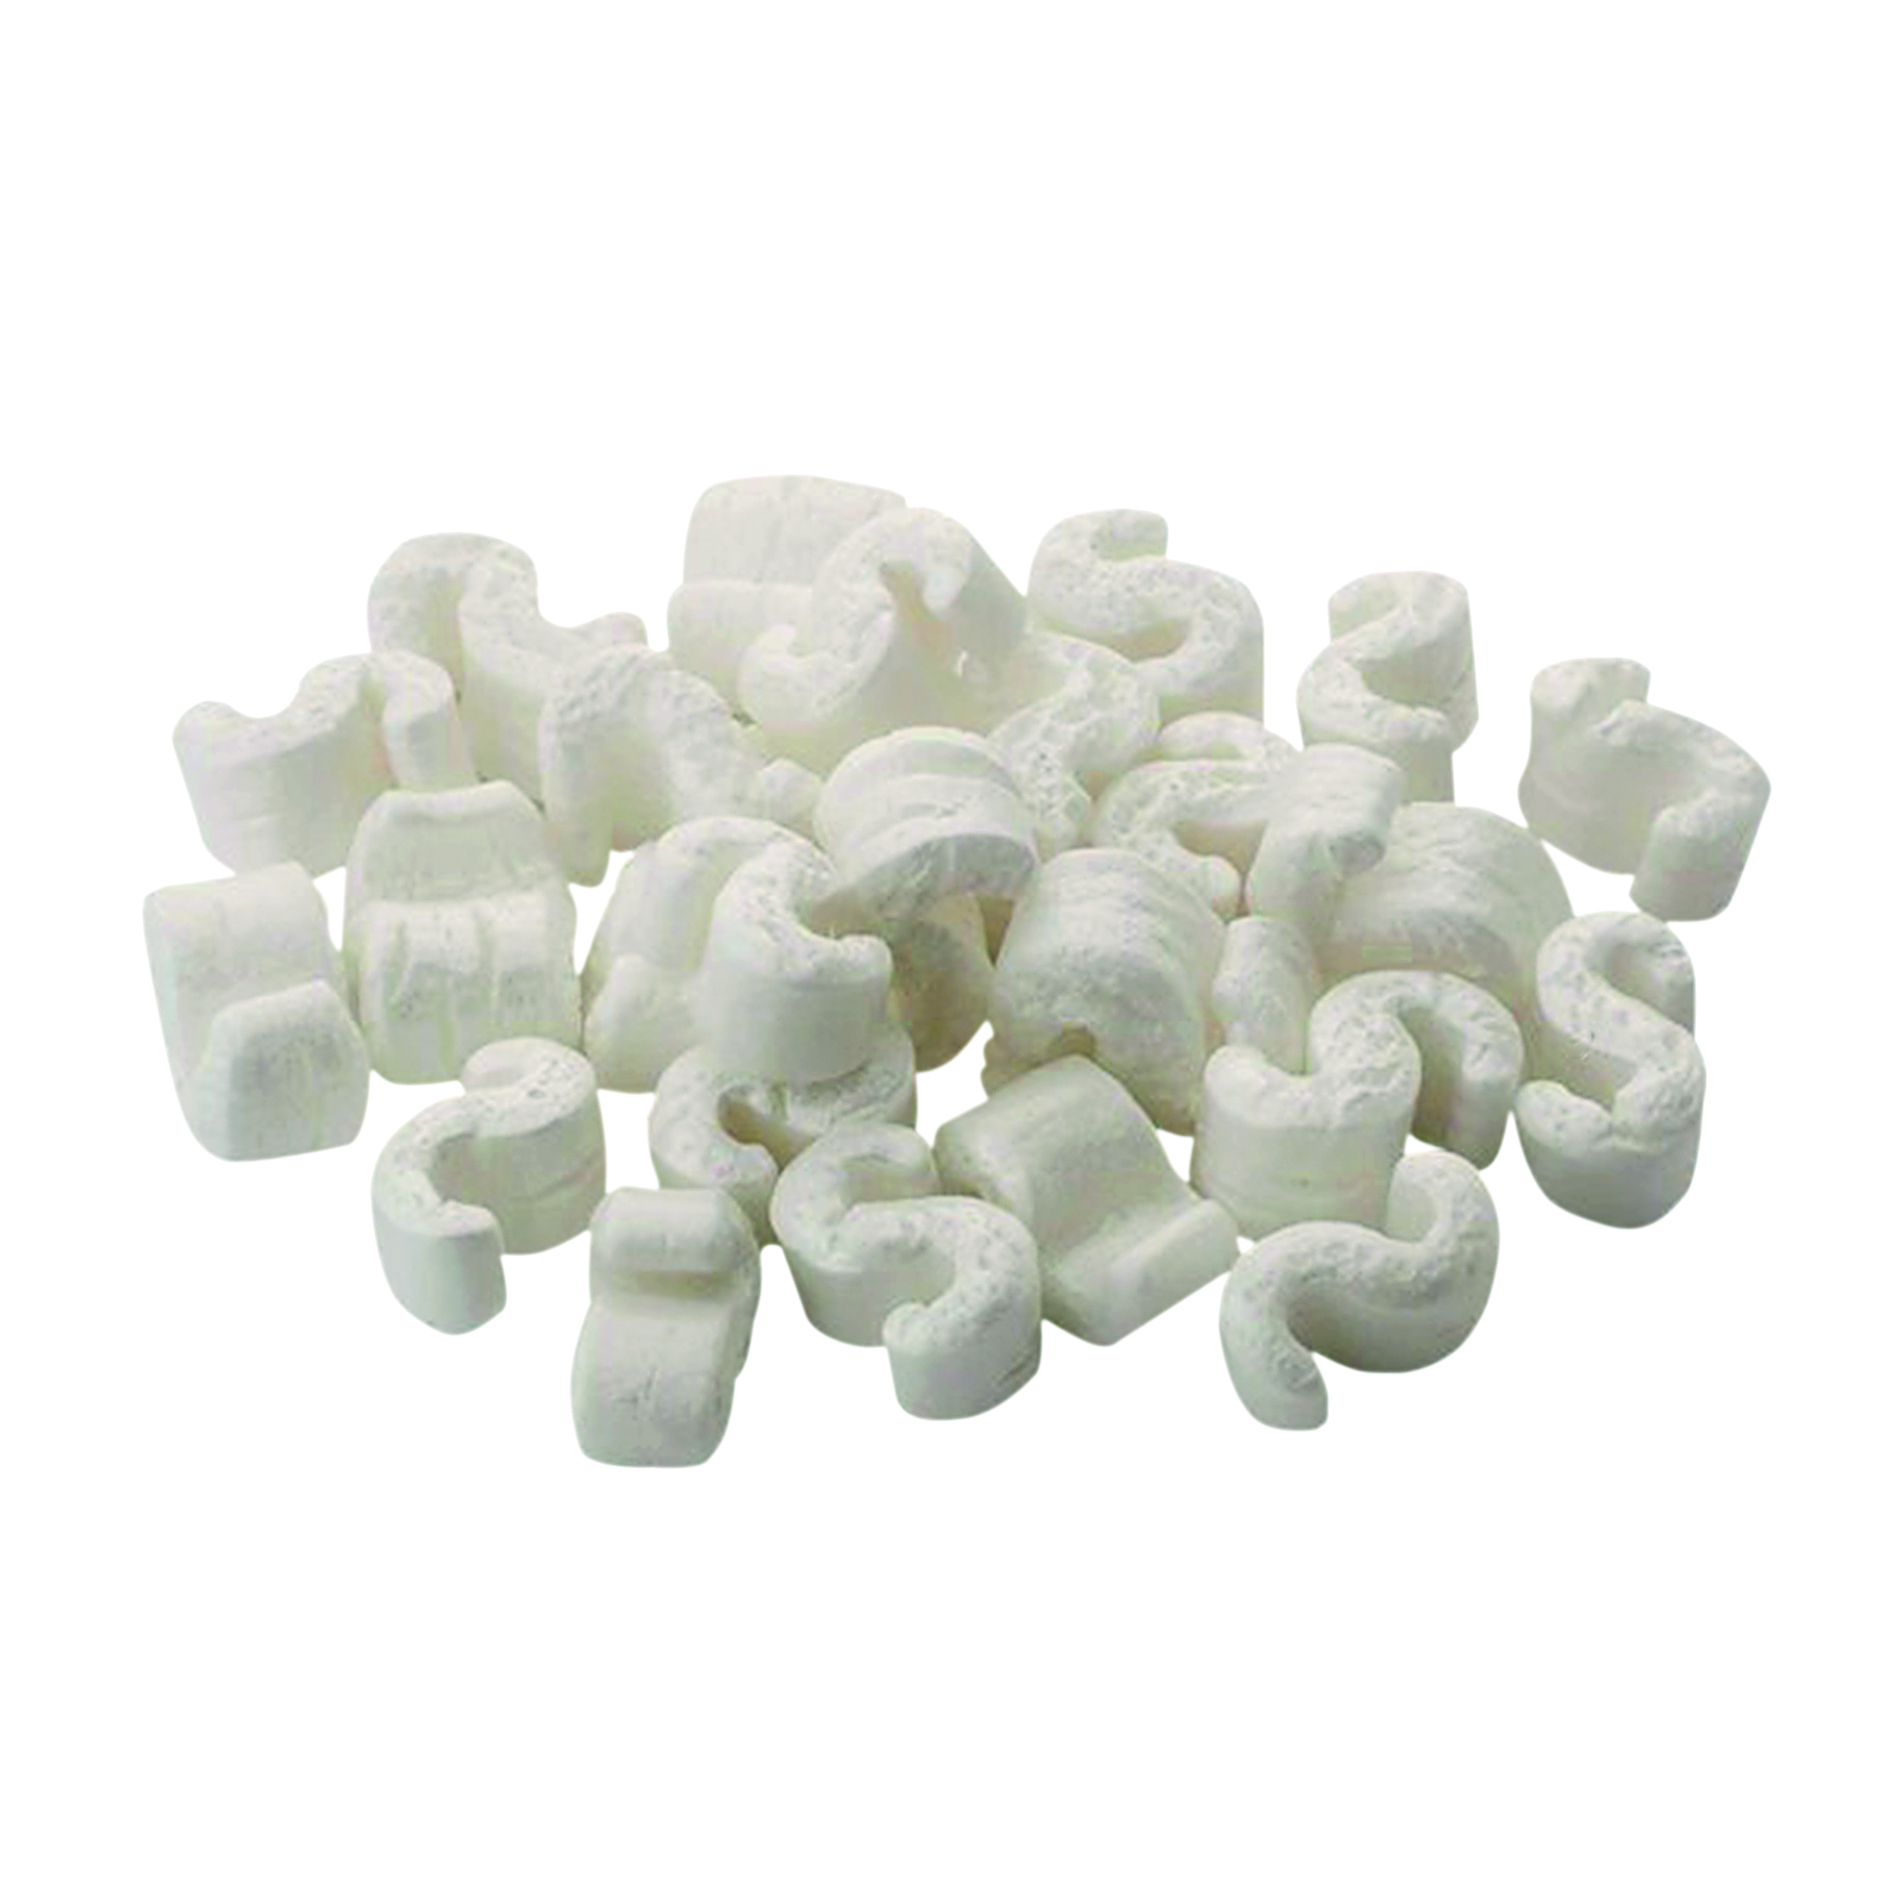 Green Loosefill Polystyrene Chips ( Pack of 15 Cubic Feet Pack) FP